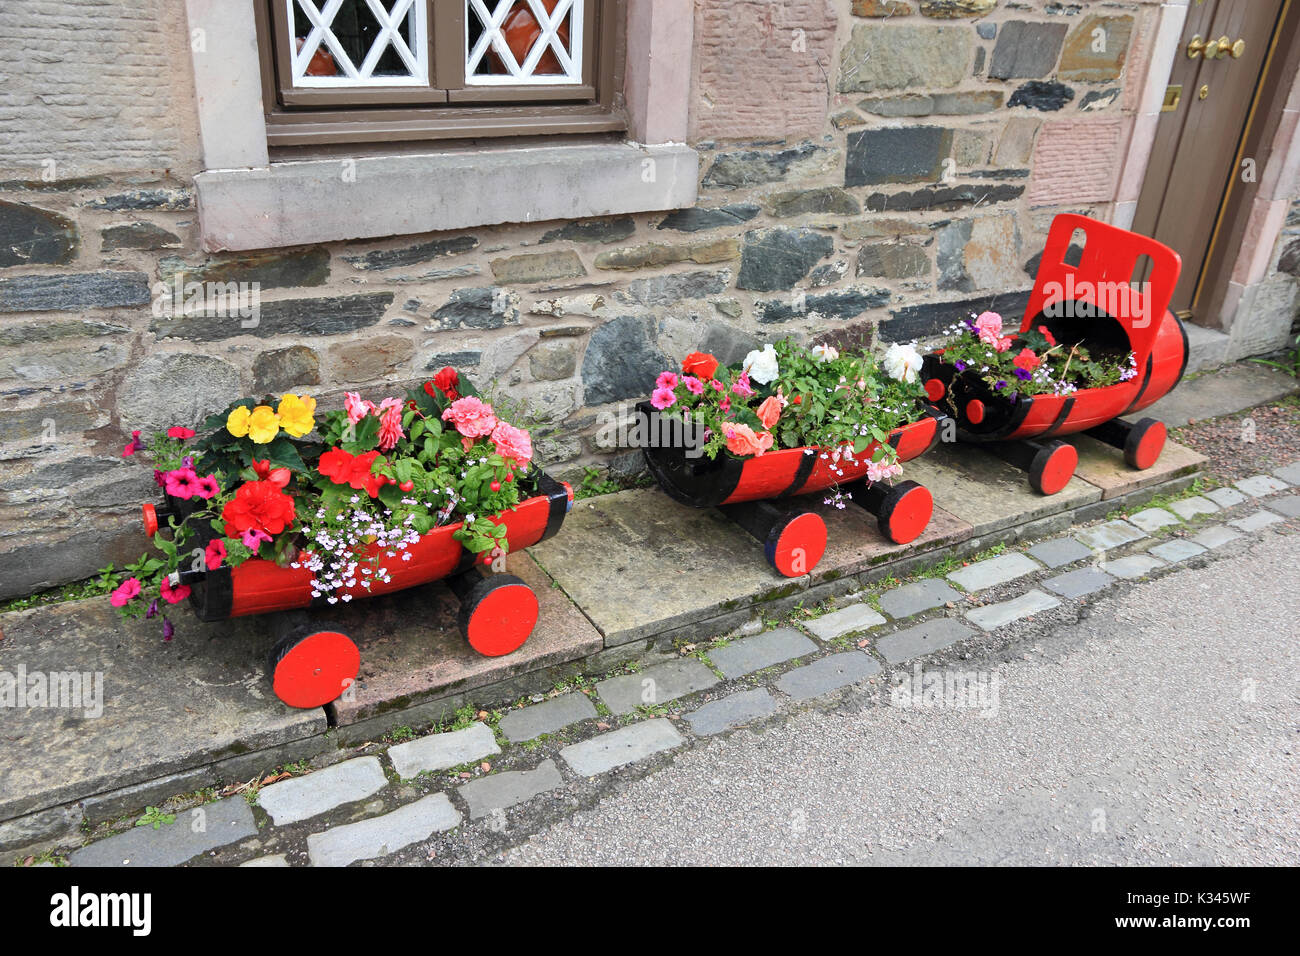 Planters in form of a train and carriages. Stock Photo